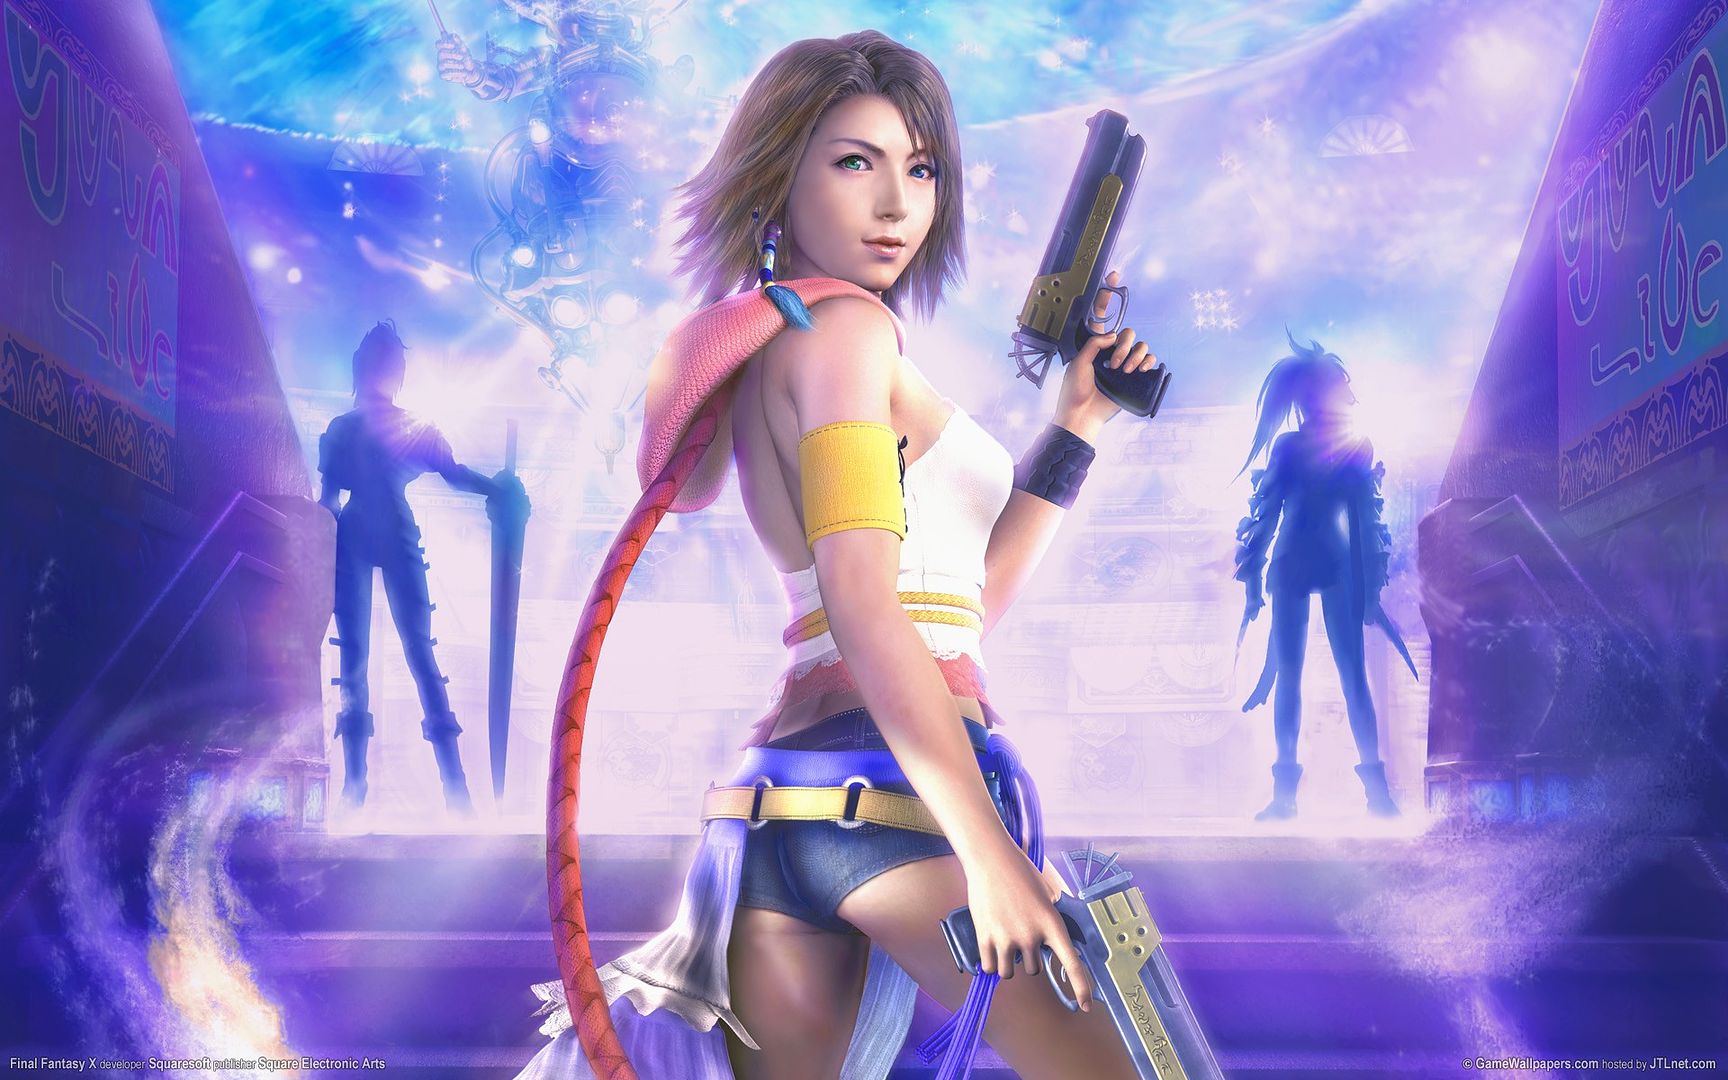 Wallpapers :: Final Fantasy X-2 picture by Strife91 - Photobucket